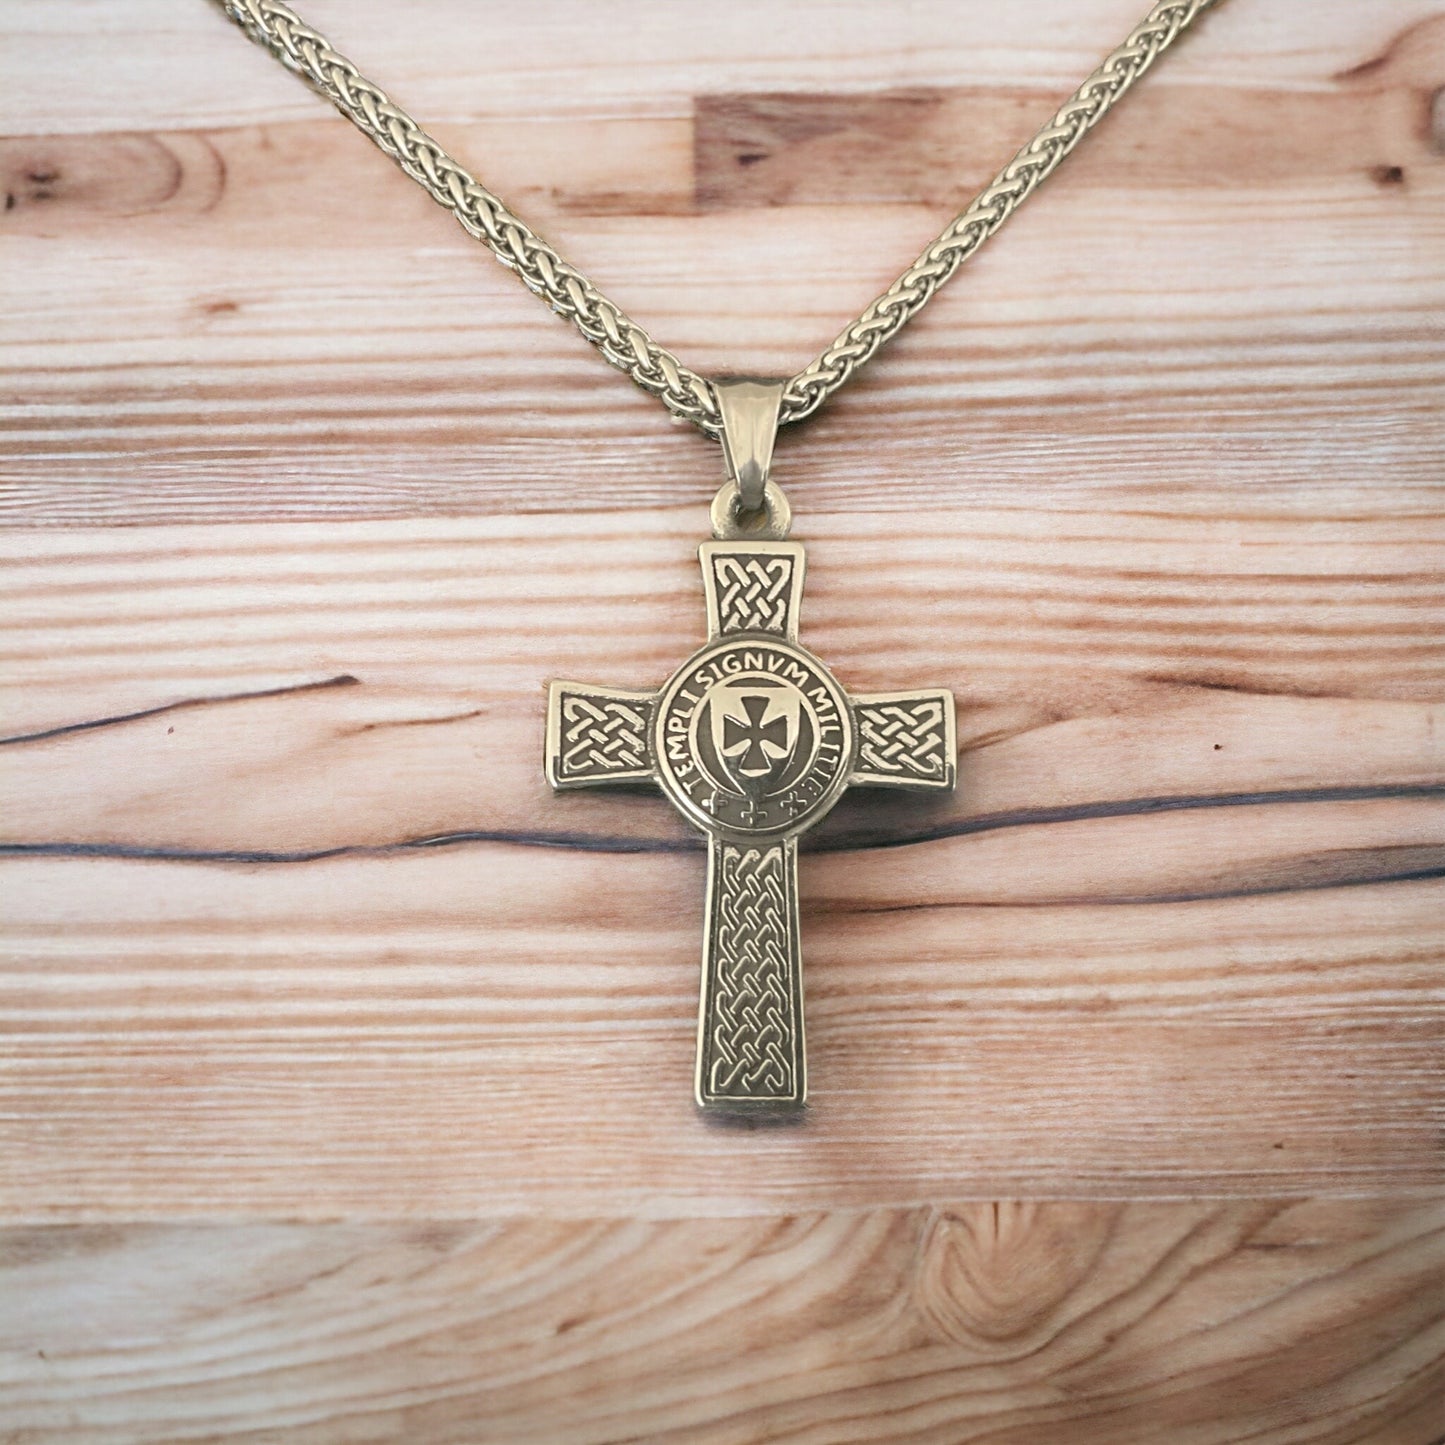 Large Double-Sided 316L Surgical Stainless Steel Crusader Knights Templar Cross Pendant + Free Chain Necklace